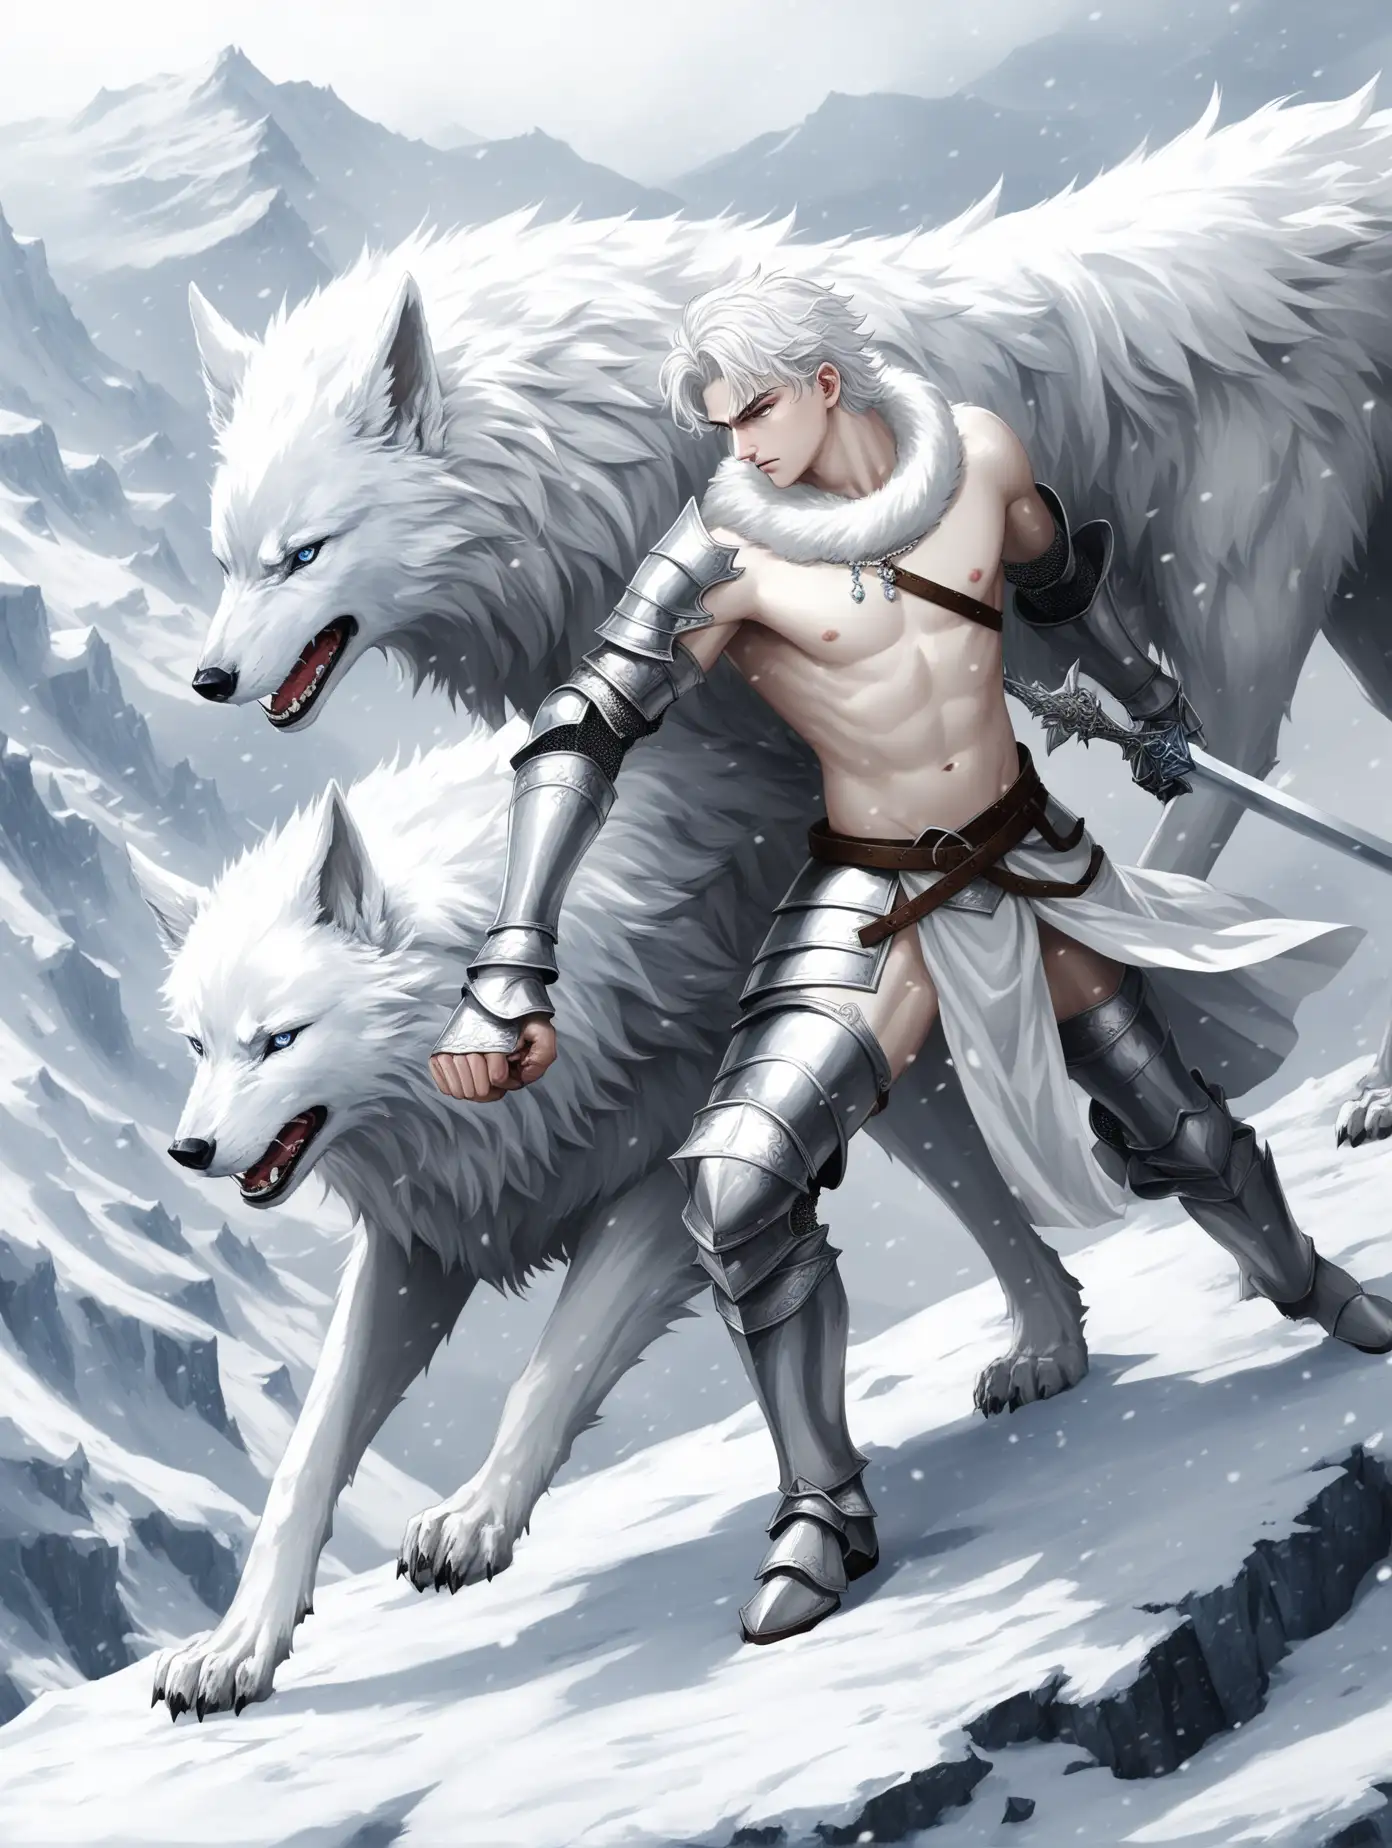 Young-White-Knight-Battles-a-Snowy-Mountain-Wolf